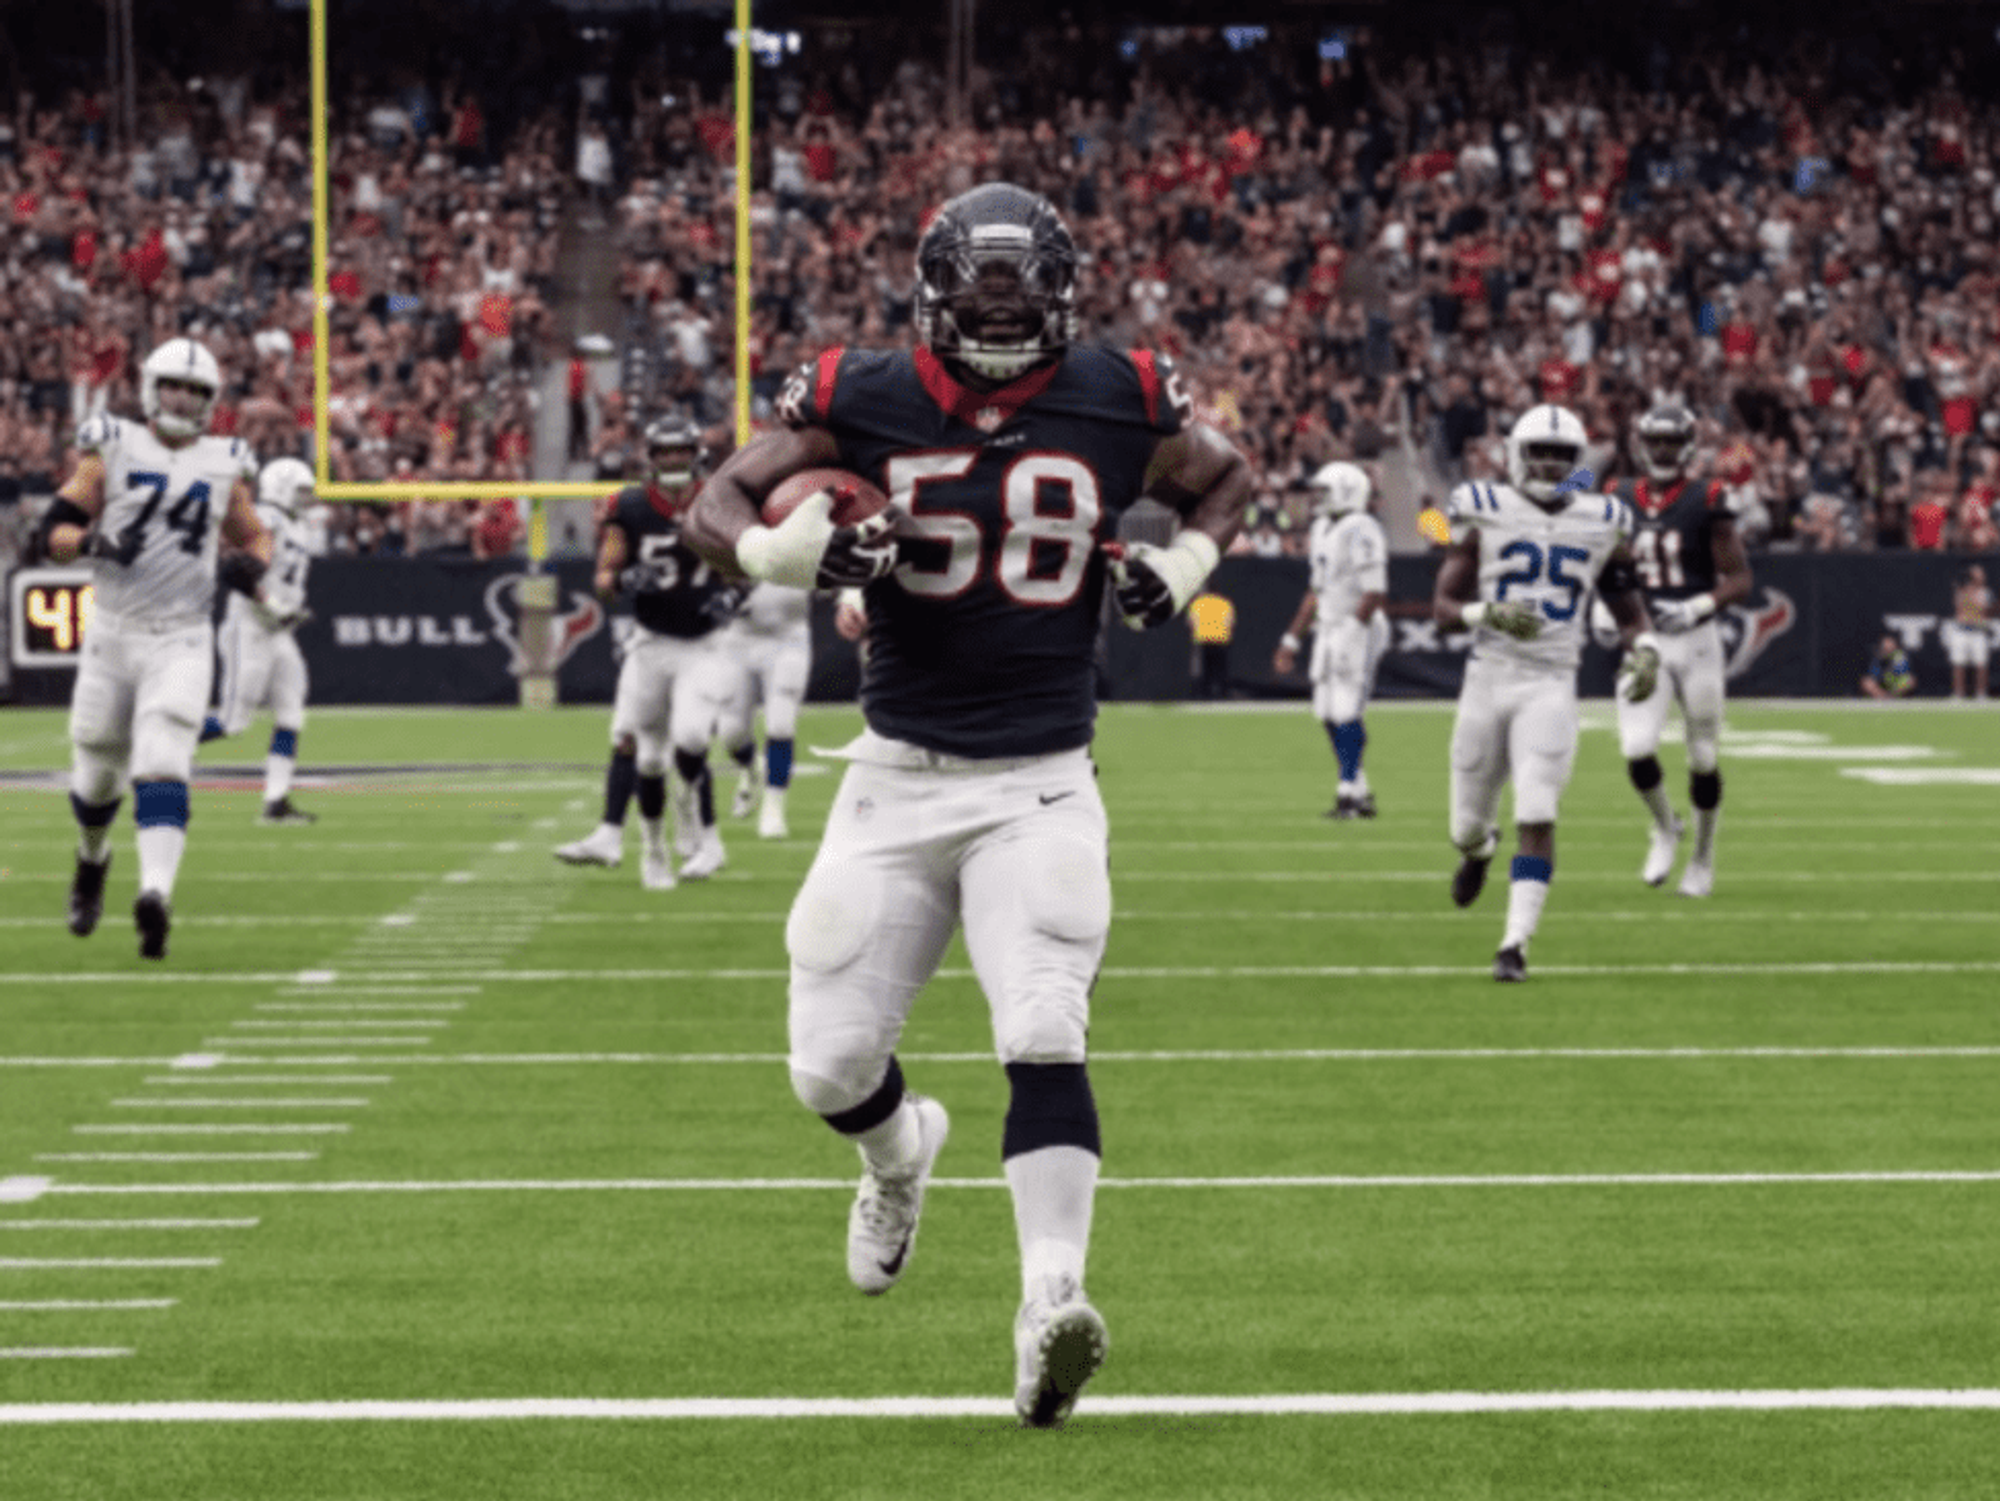 Lamar Houston's touchdown kept Texans in the game against Indianapolis Colts